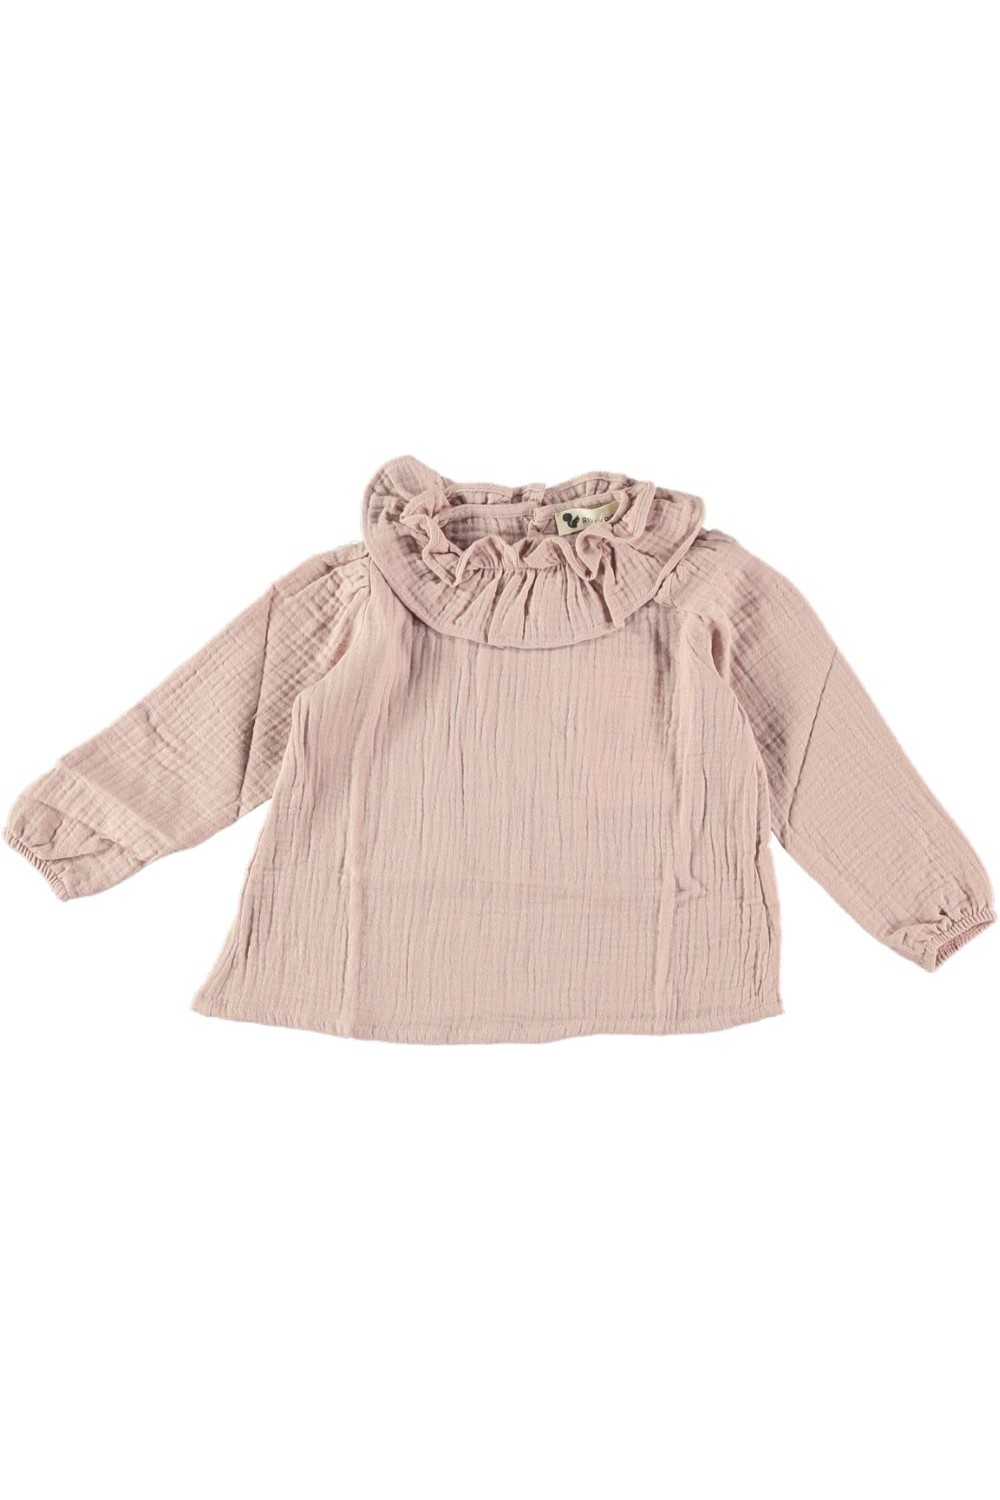 Baby blouse Pirouette pink